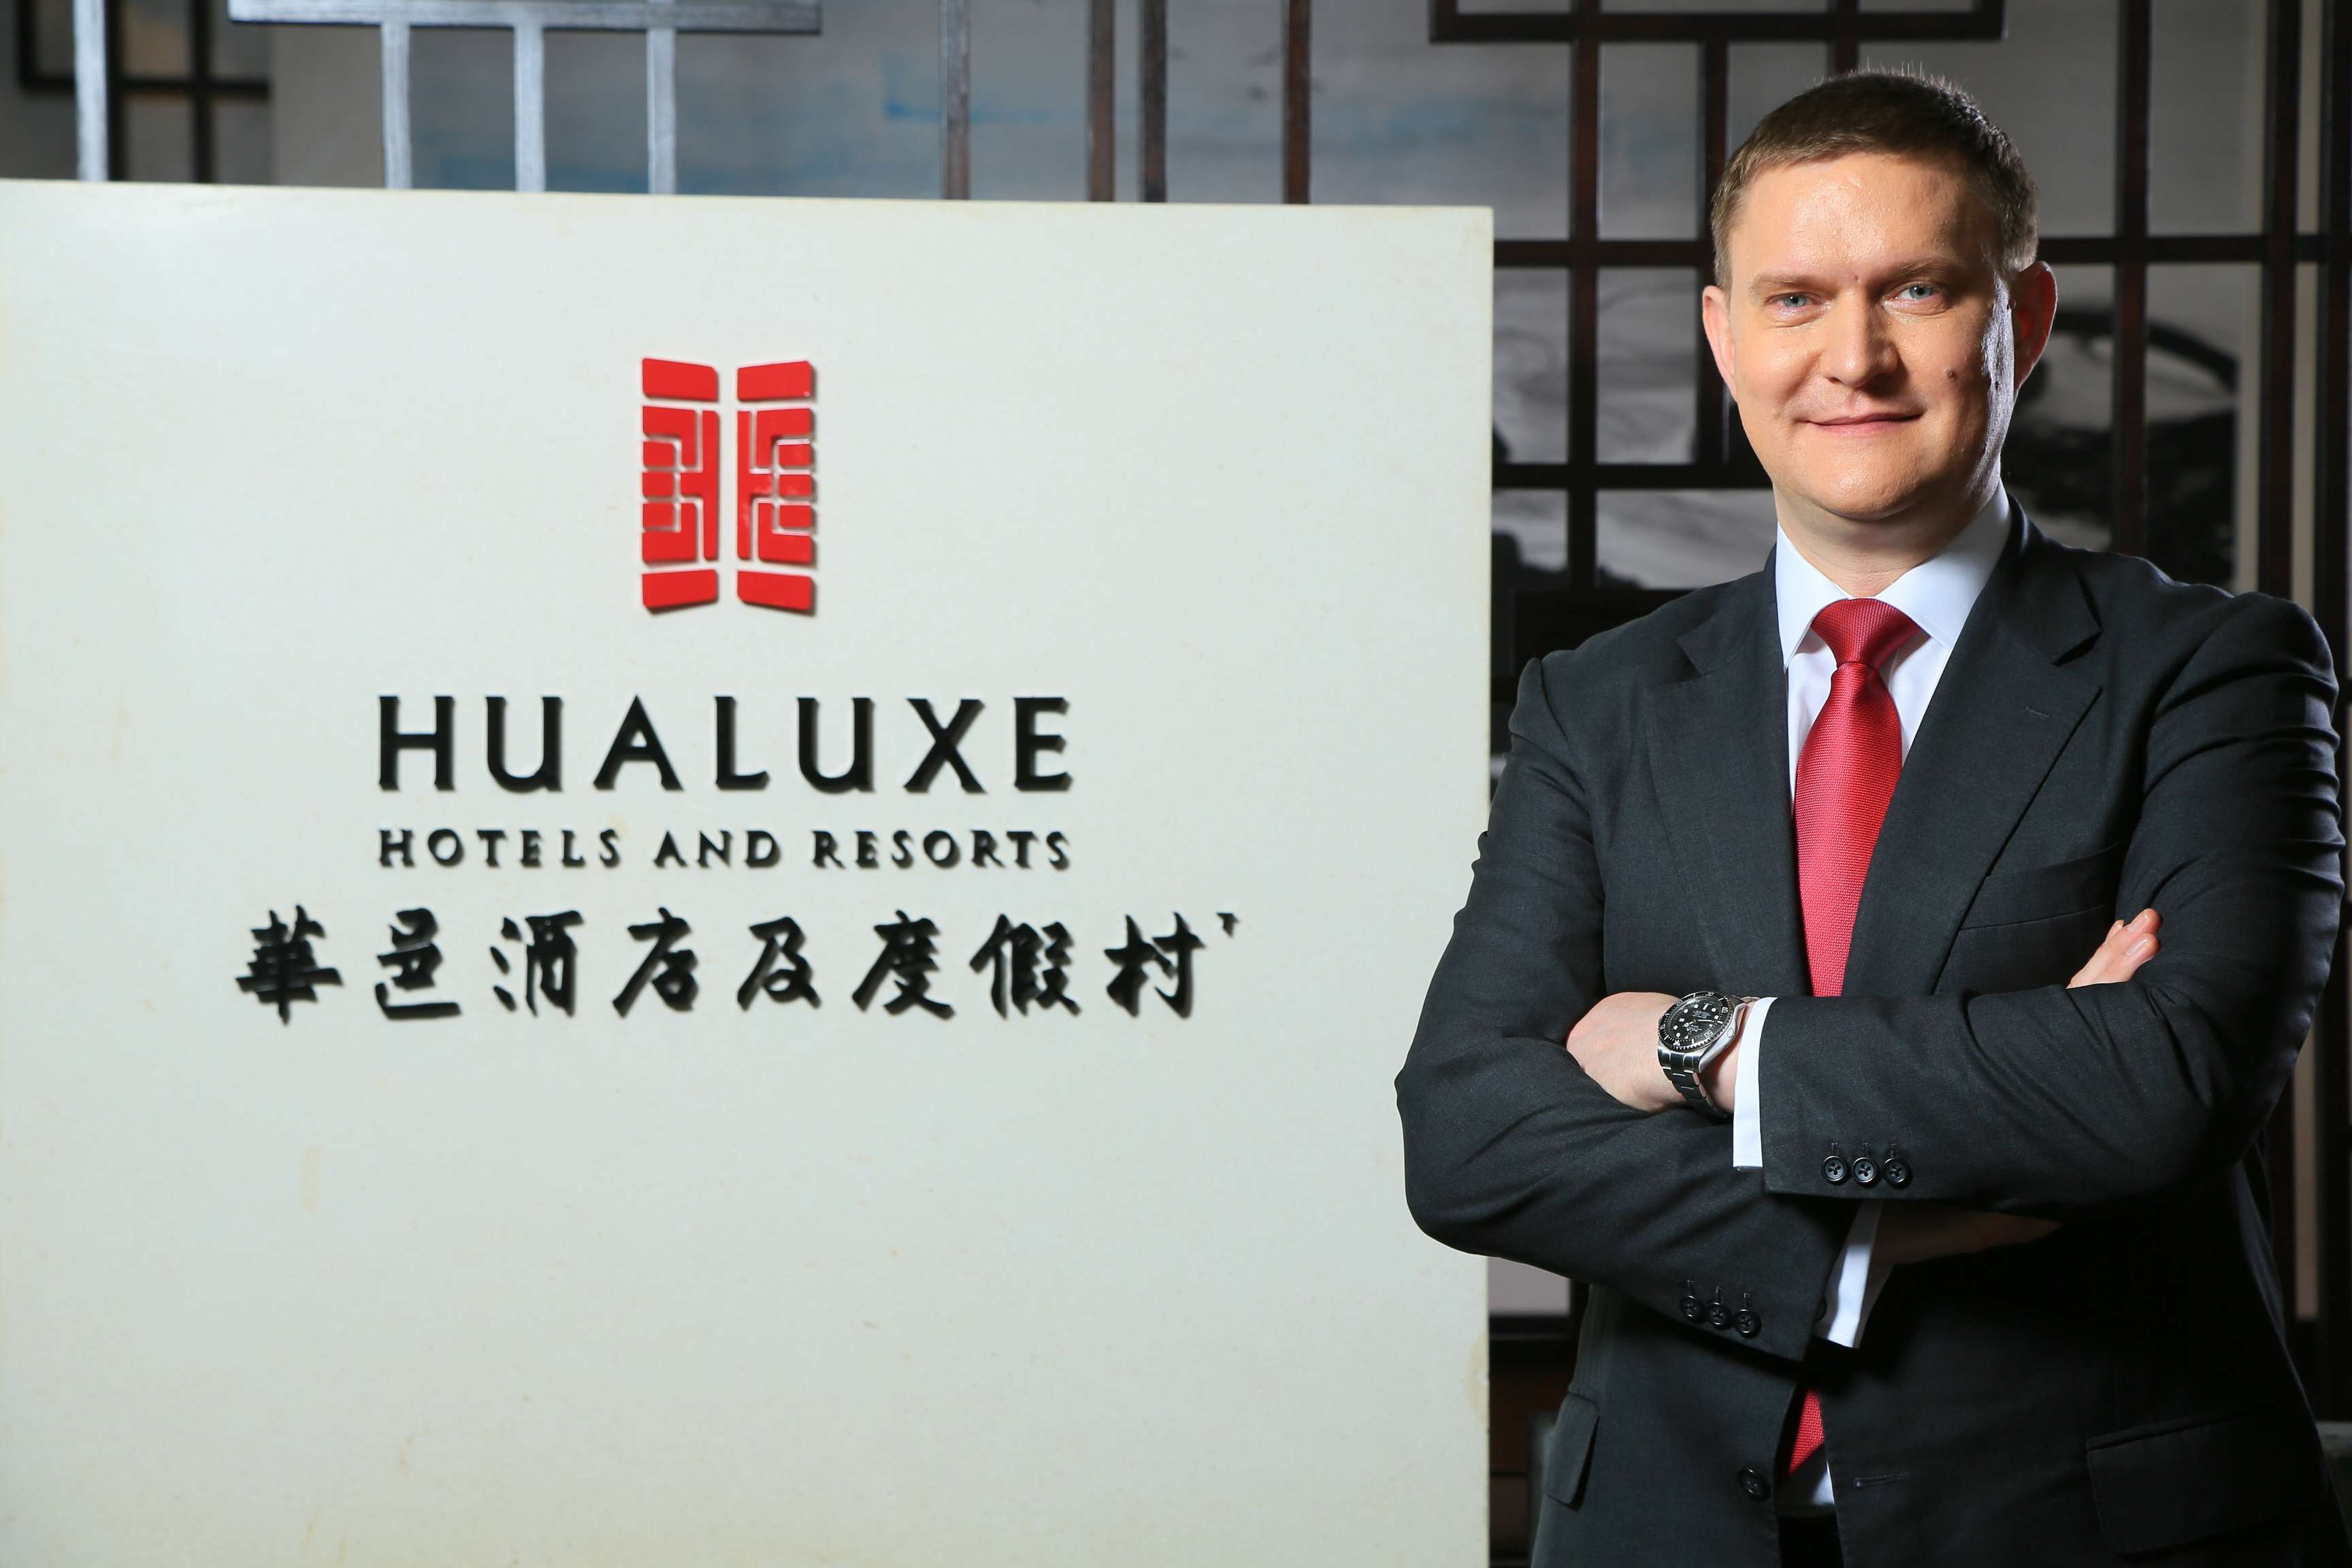 Hualuxe Logo - Hotel giant IHG to introduce China-inspired brand to the world ...